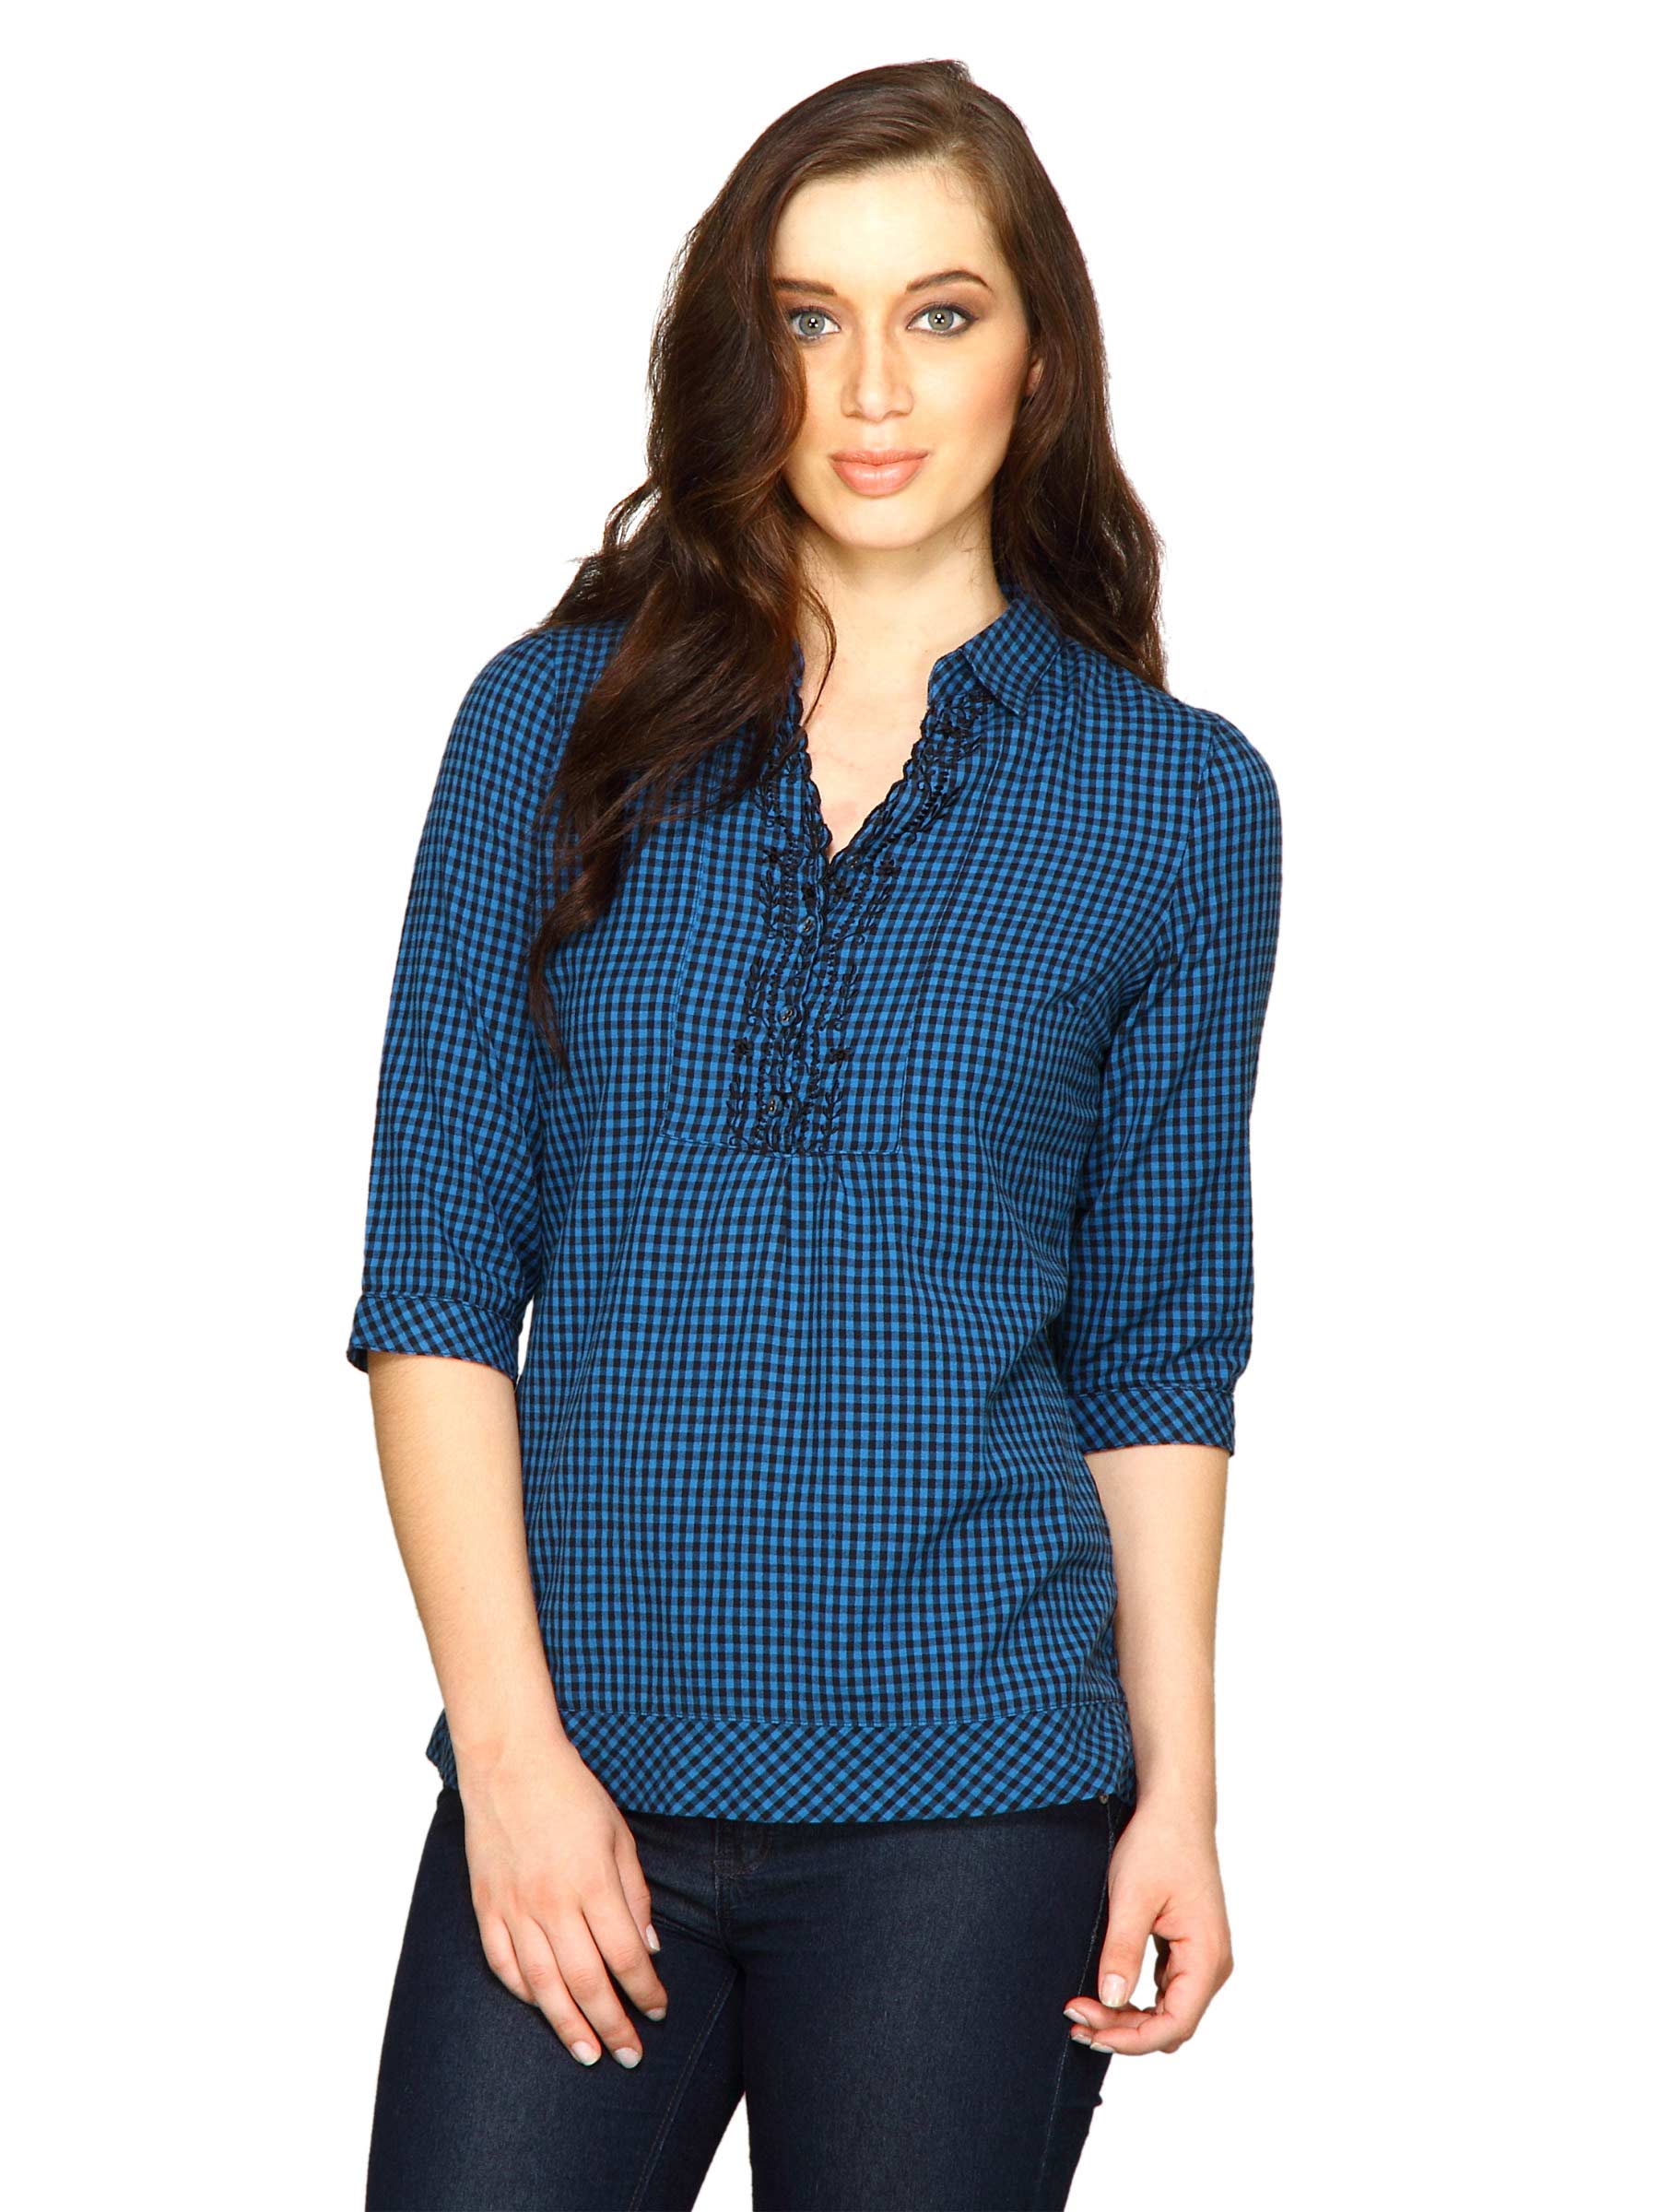 Scullers For Her Women Light Work Blue Tops